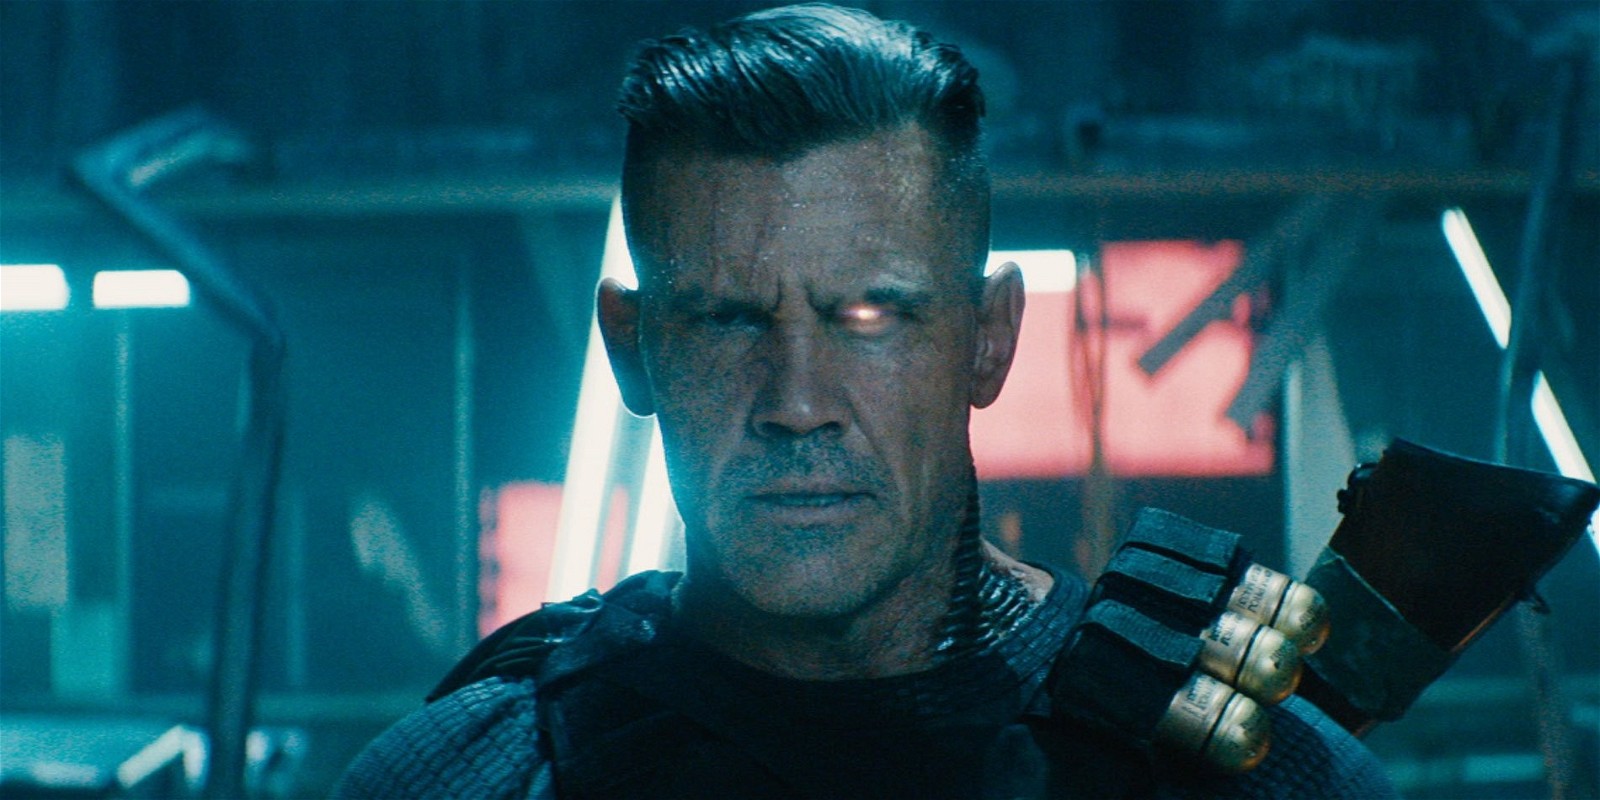 Josh Brolin previously played the role of Cable in Deadpool 2